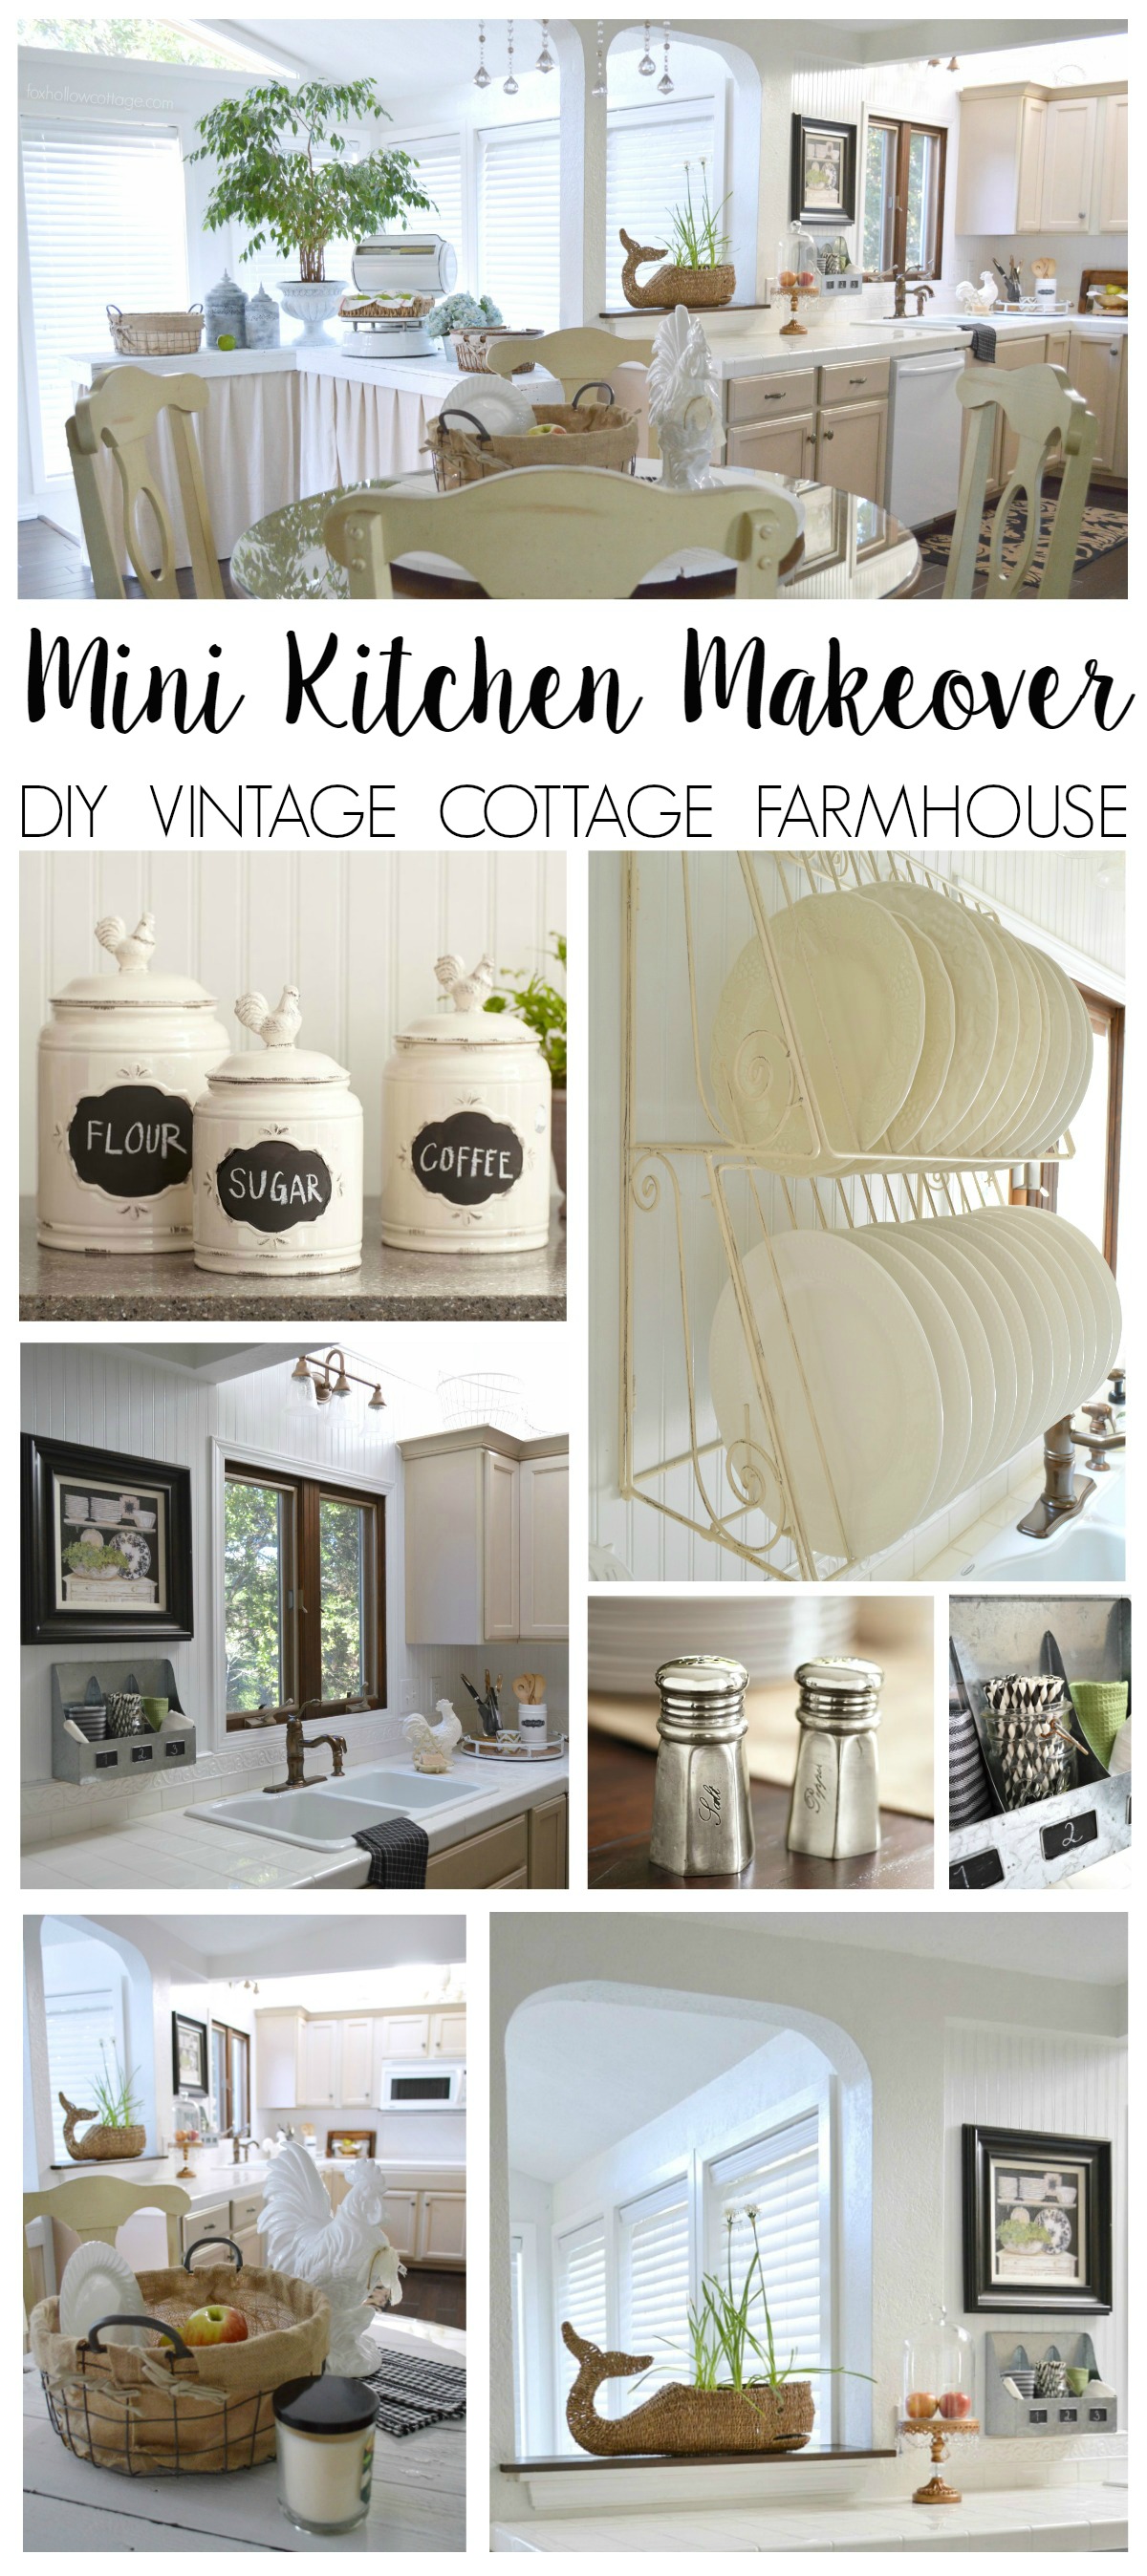 A-diy-mini-kitchen-makeover-refresh.-This-coastal-cottage-in-white-and-neutrals-gets-a-spruce-up-with-vintae-cottage-and-farmhouse-style-home-decor.